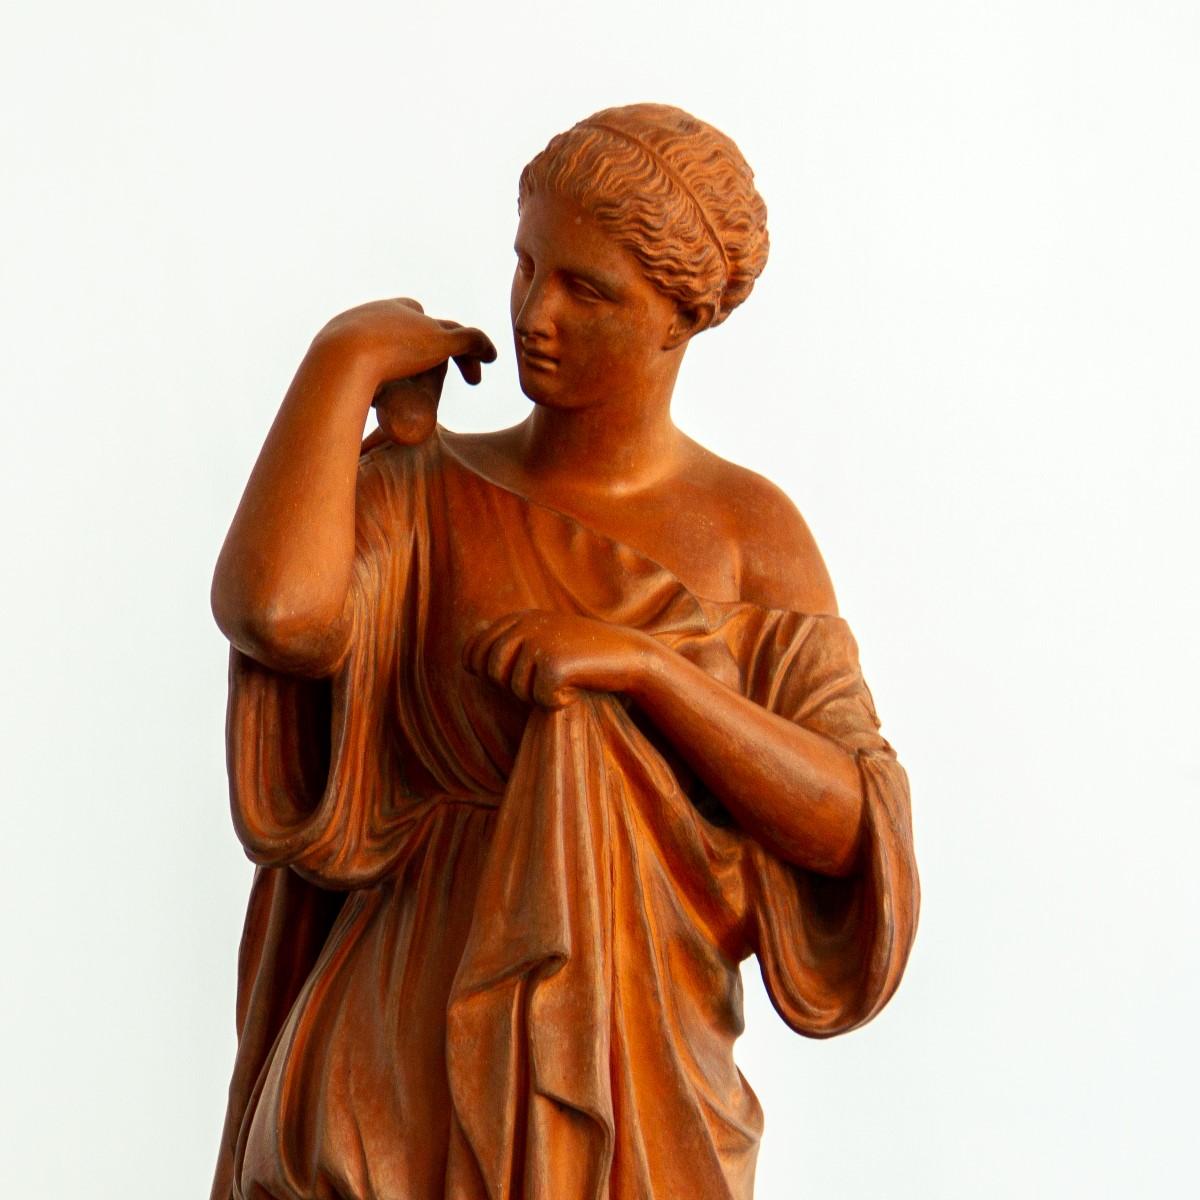 After the Antique a 19th century terracotta figure of Diana de Gabies. Stamped J.M Blashfield. 

John Marriott Blashfield (1811-1882) was a mosaic floor and terracotta manufacturer in the 19th century. His early career saw him working for cement